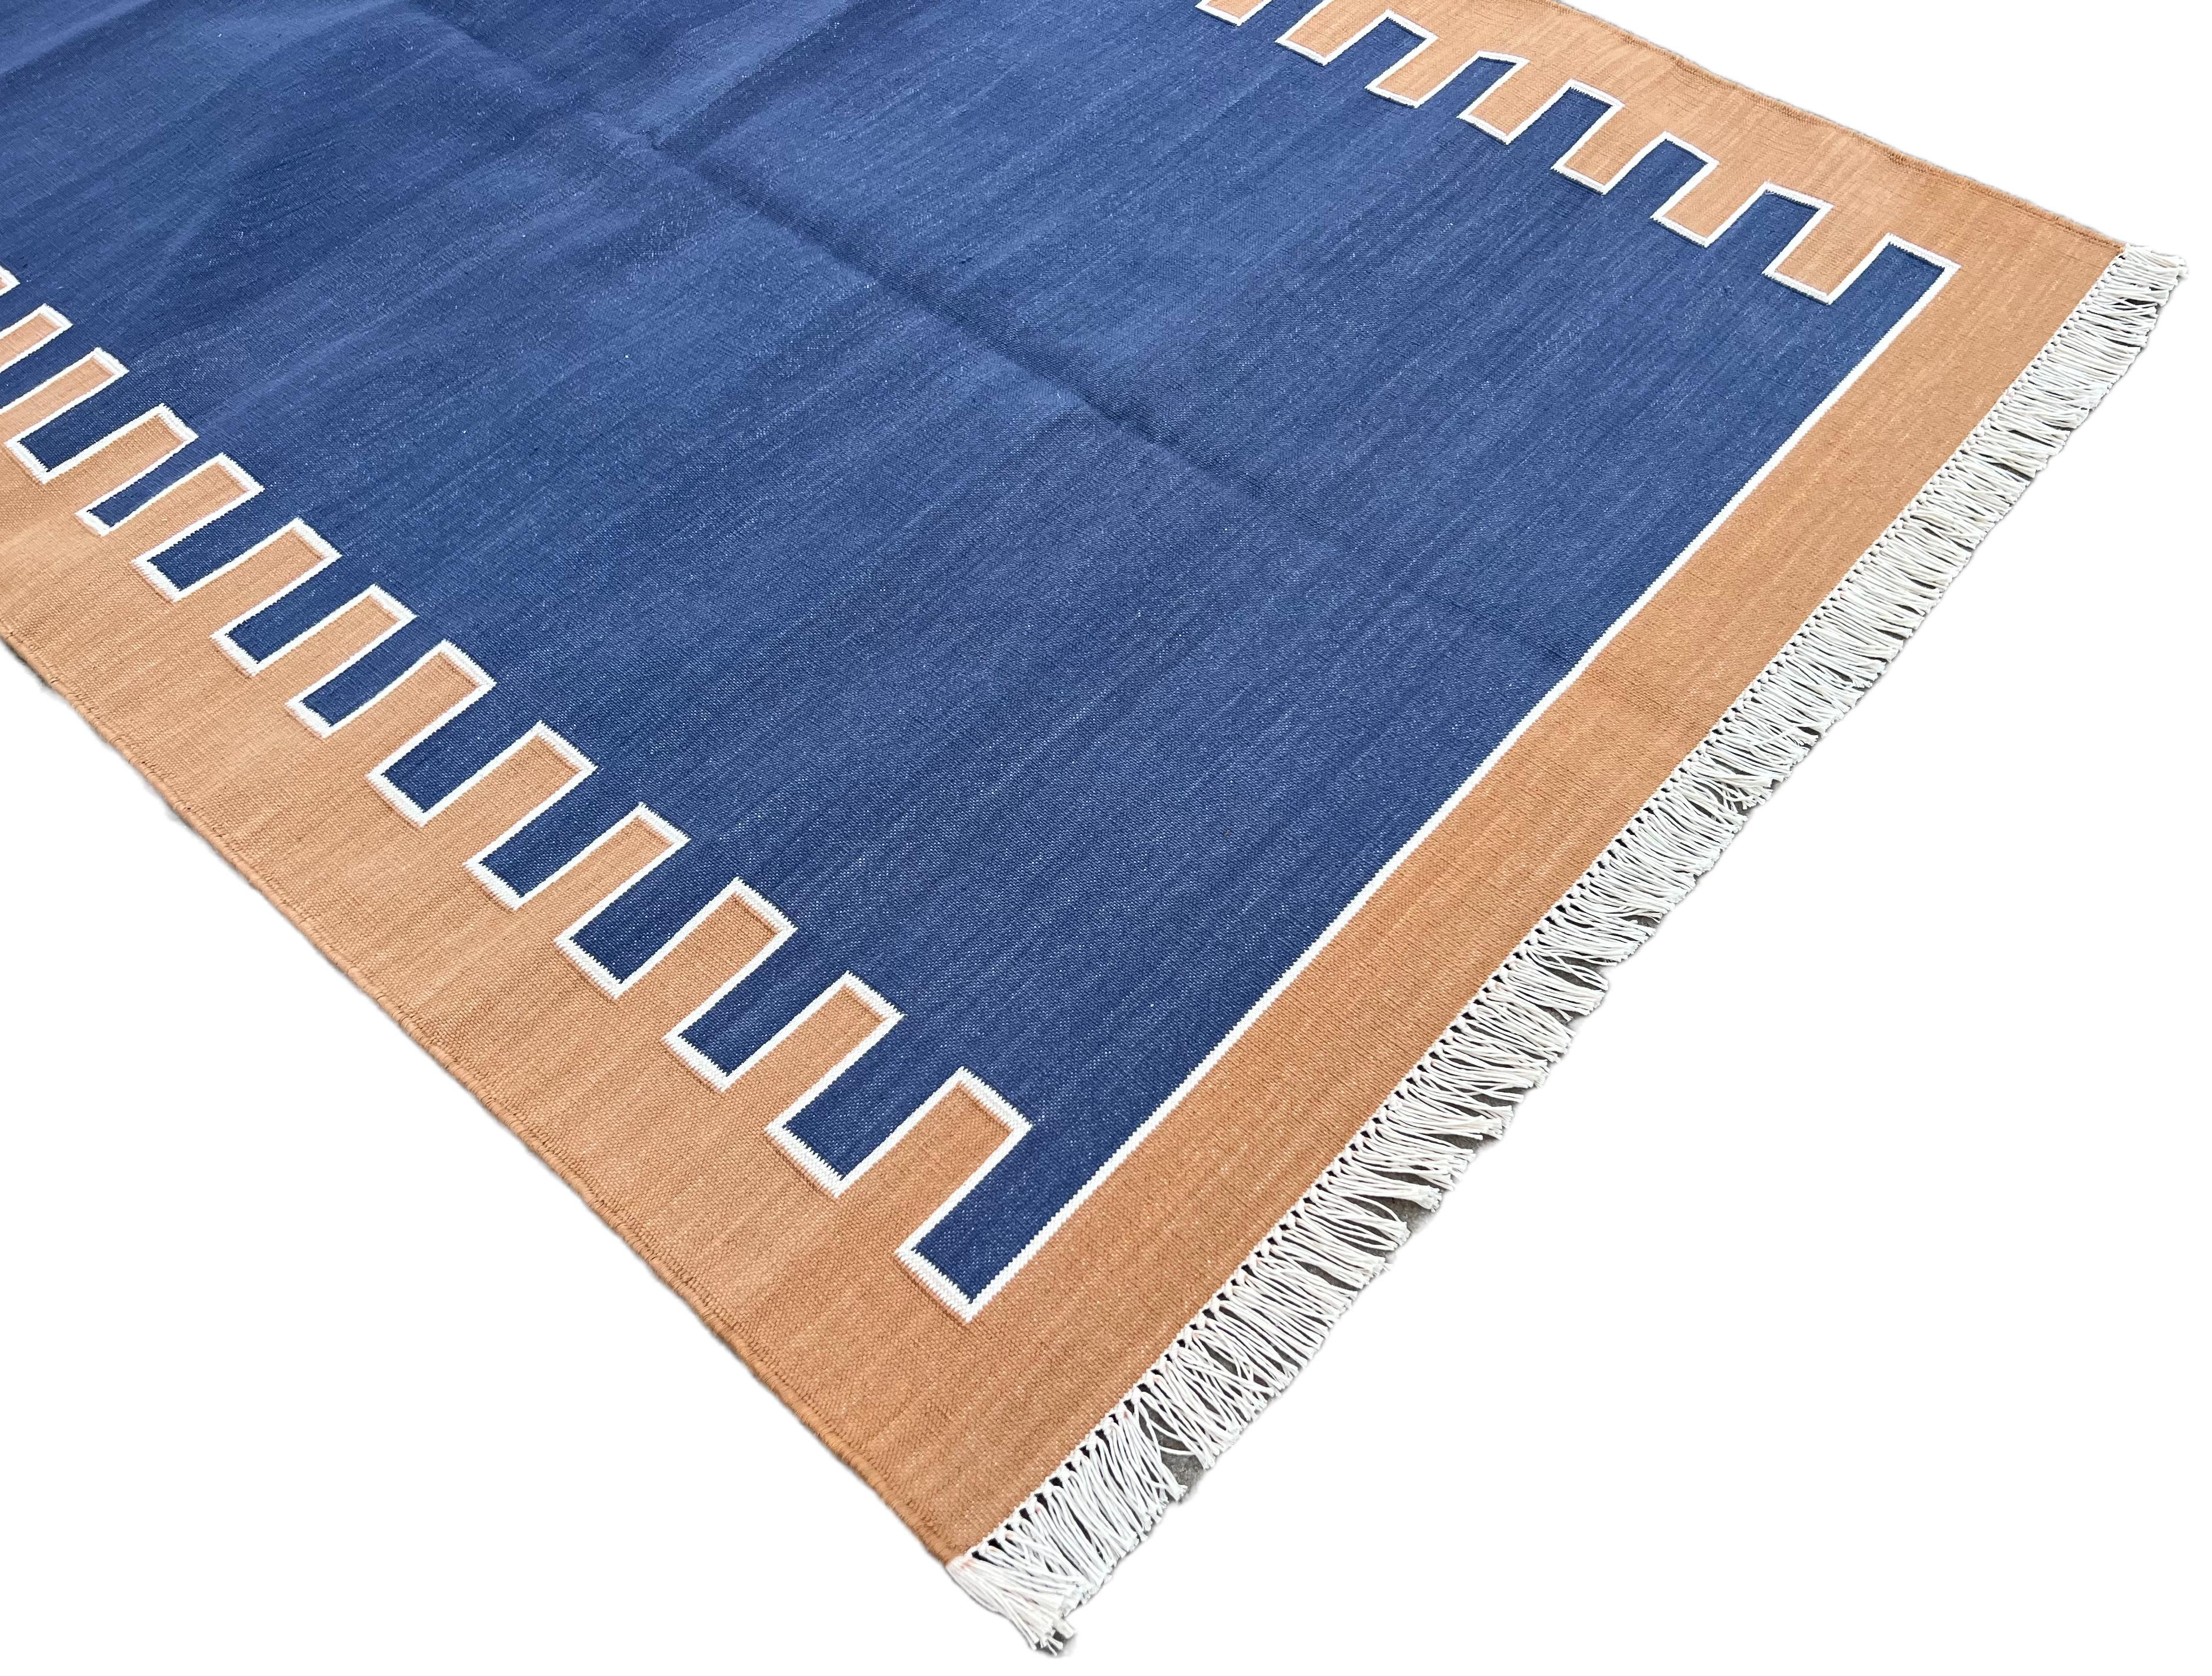 Mid-Century Modern Handmade Cotton Area Flat Weave Rug, 3x5 Blue And Tan Zig Zag Striped Dhurrie For Sale